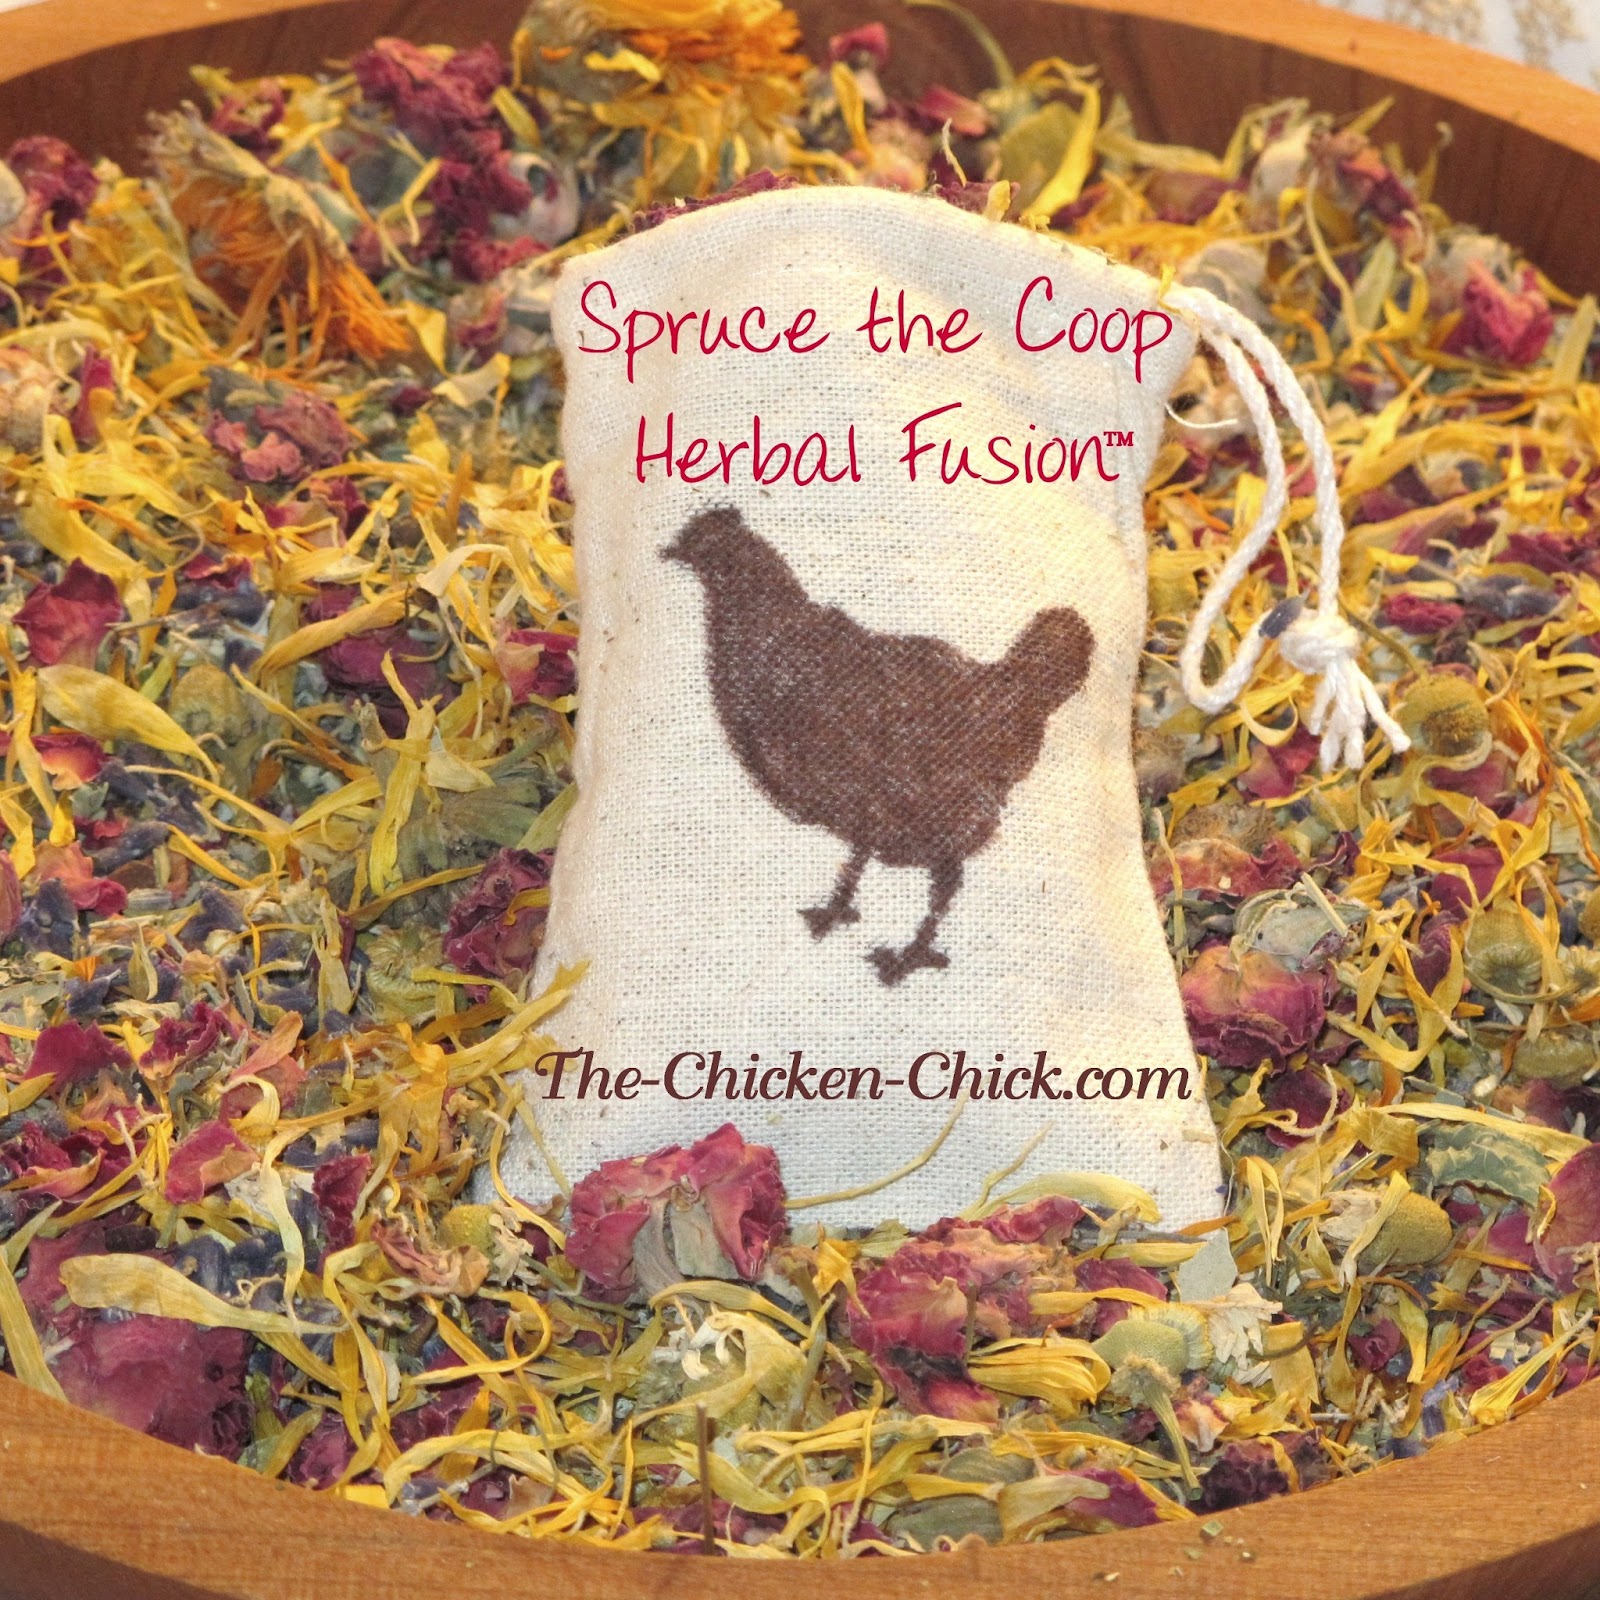 add herbs to your chicken coop- fresh or dried. I make Spruce the Coop 